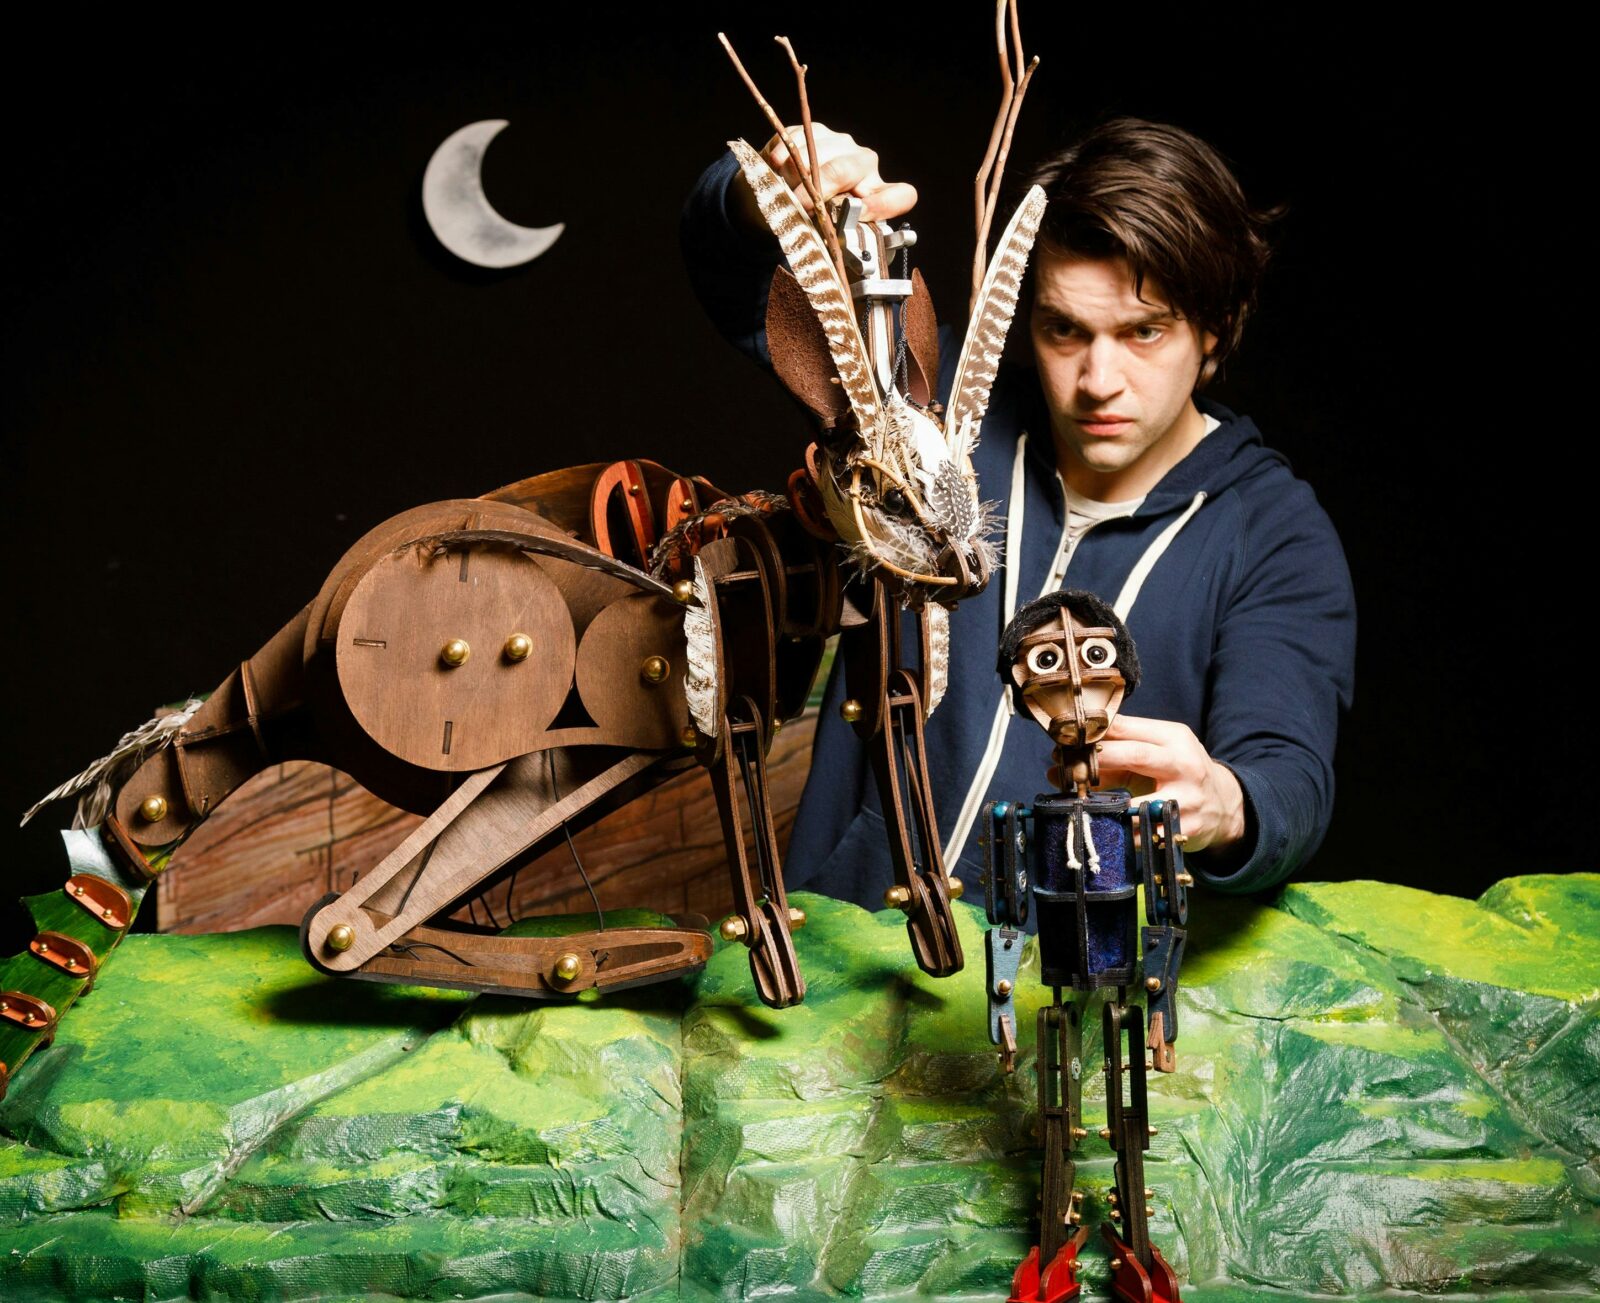 A young man holds two puppets of wood on a green landscape